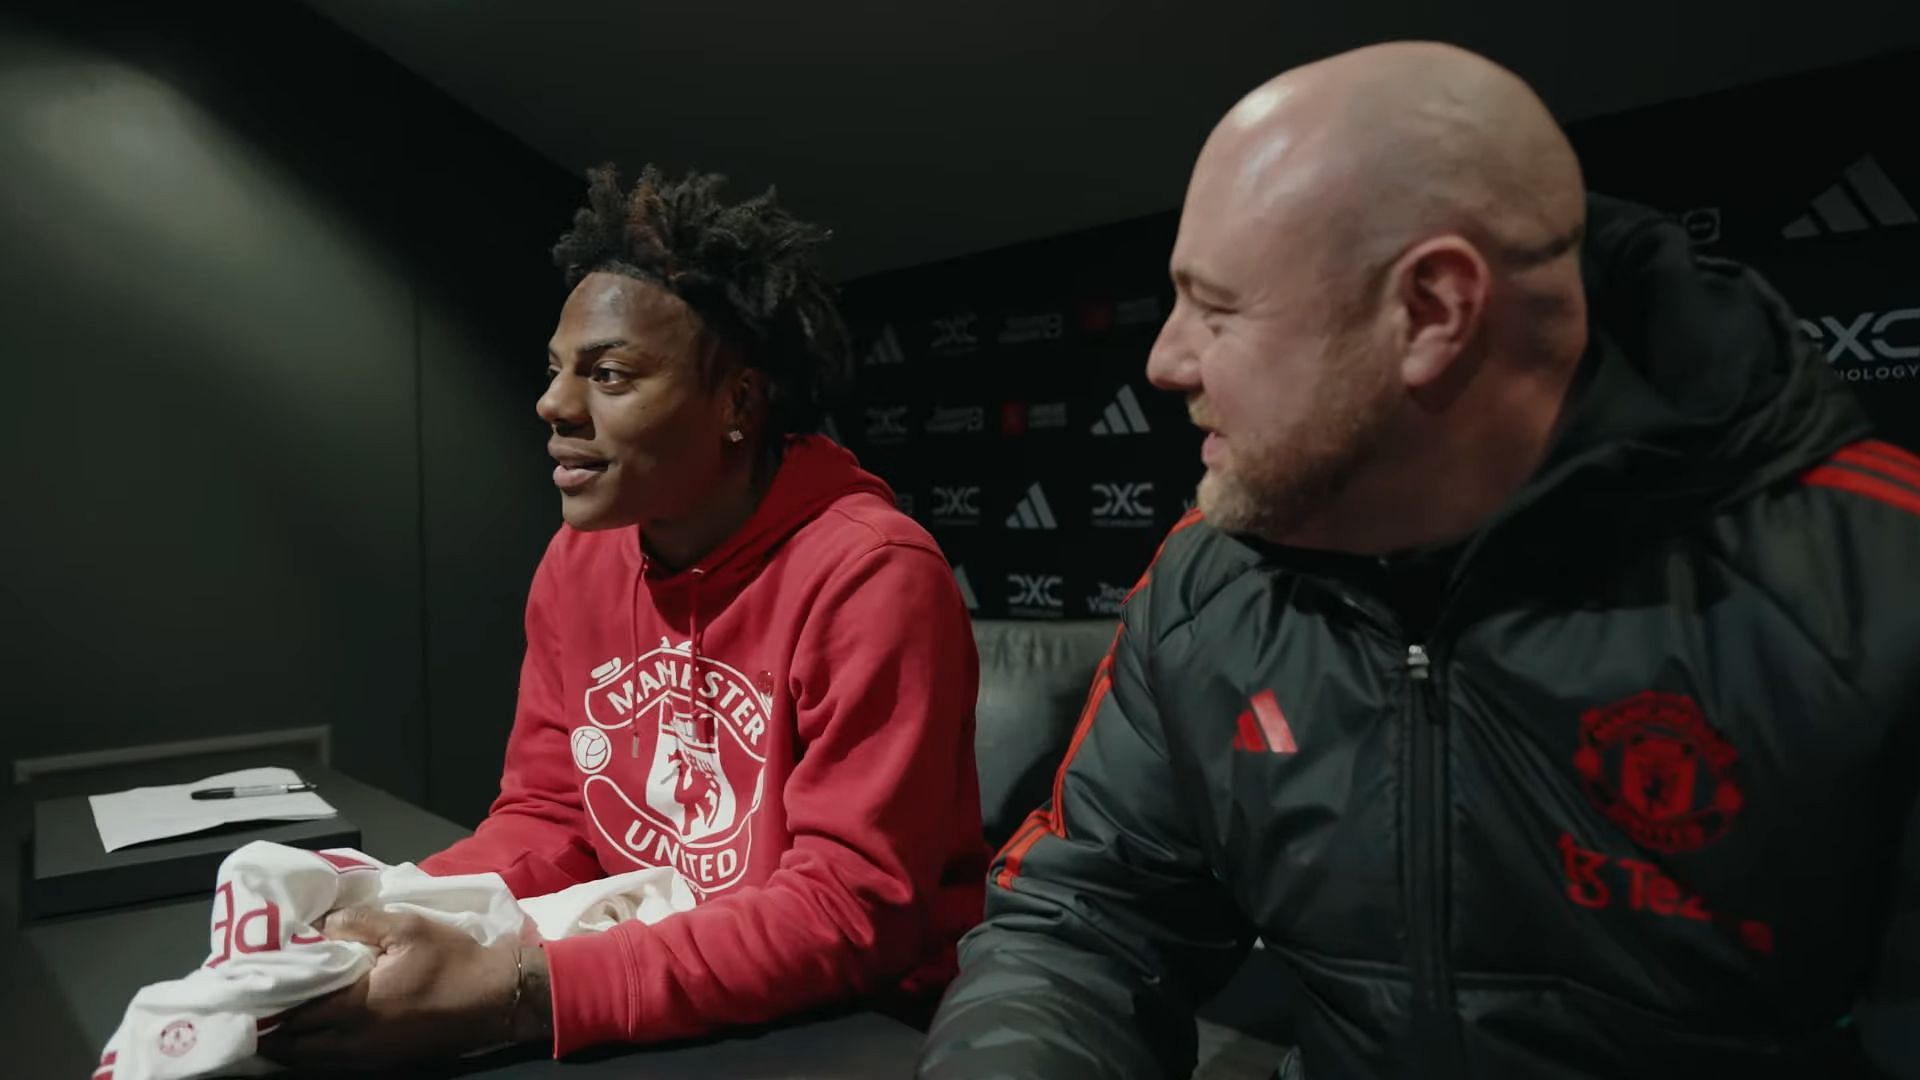 IShowSpeed signs contract with Manchester United (Image via IShowSpeed/YouTube)